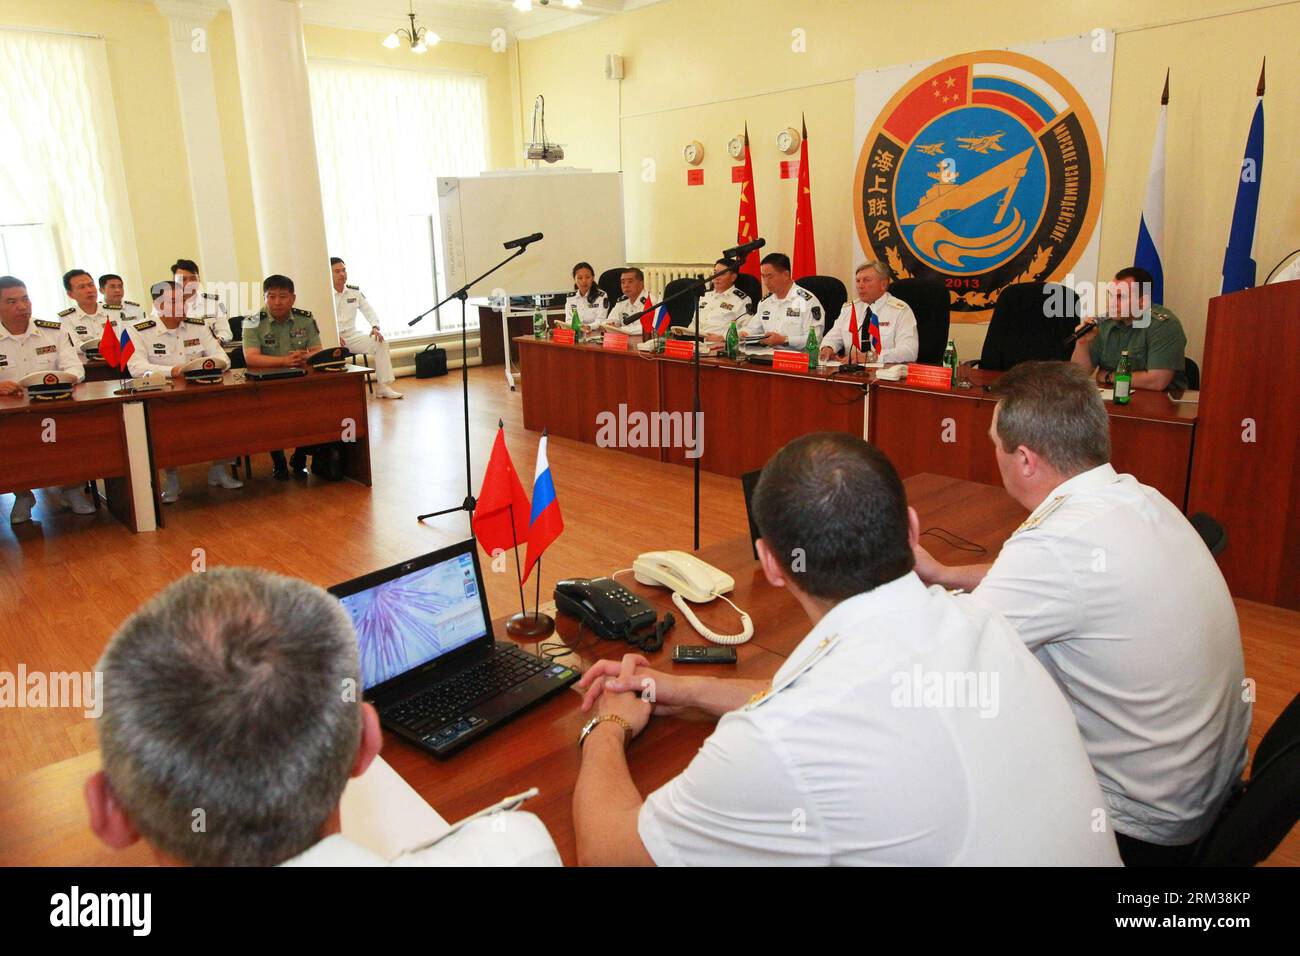 Bildnummer: 60107426  Datum: 11.07.2013  Copyright: imago/Xinhua (130711) -- VLADIVOSTOK, July 11, 2013 (Xinhua) -- Naval officers from China and Russia discuss and summarize the drills at the closing ceremony of the joint naval drills in Vladivostok, Russia, July 11, 2013. Ding Yiping, deputy commander of the Chinese Navy and director of the Joint Sea-2013 drill, announced the end of the joint naval drills here on Thursday. (Xinhua/Zha Chunming) (lyx) RUSSIA-CHINA-JOINT NAVAL DRILL-CLOSE PUBLICATIONxNOTxINxCHN Gesellschaft Militär Marine Abschluss Manöver xbs x0x 2013 quer      60107426 Date Stock Photo